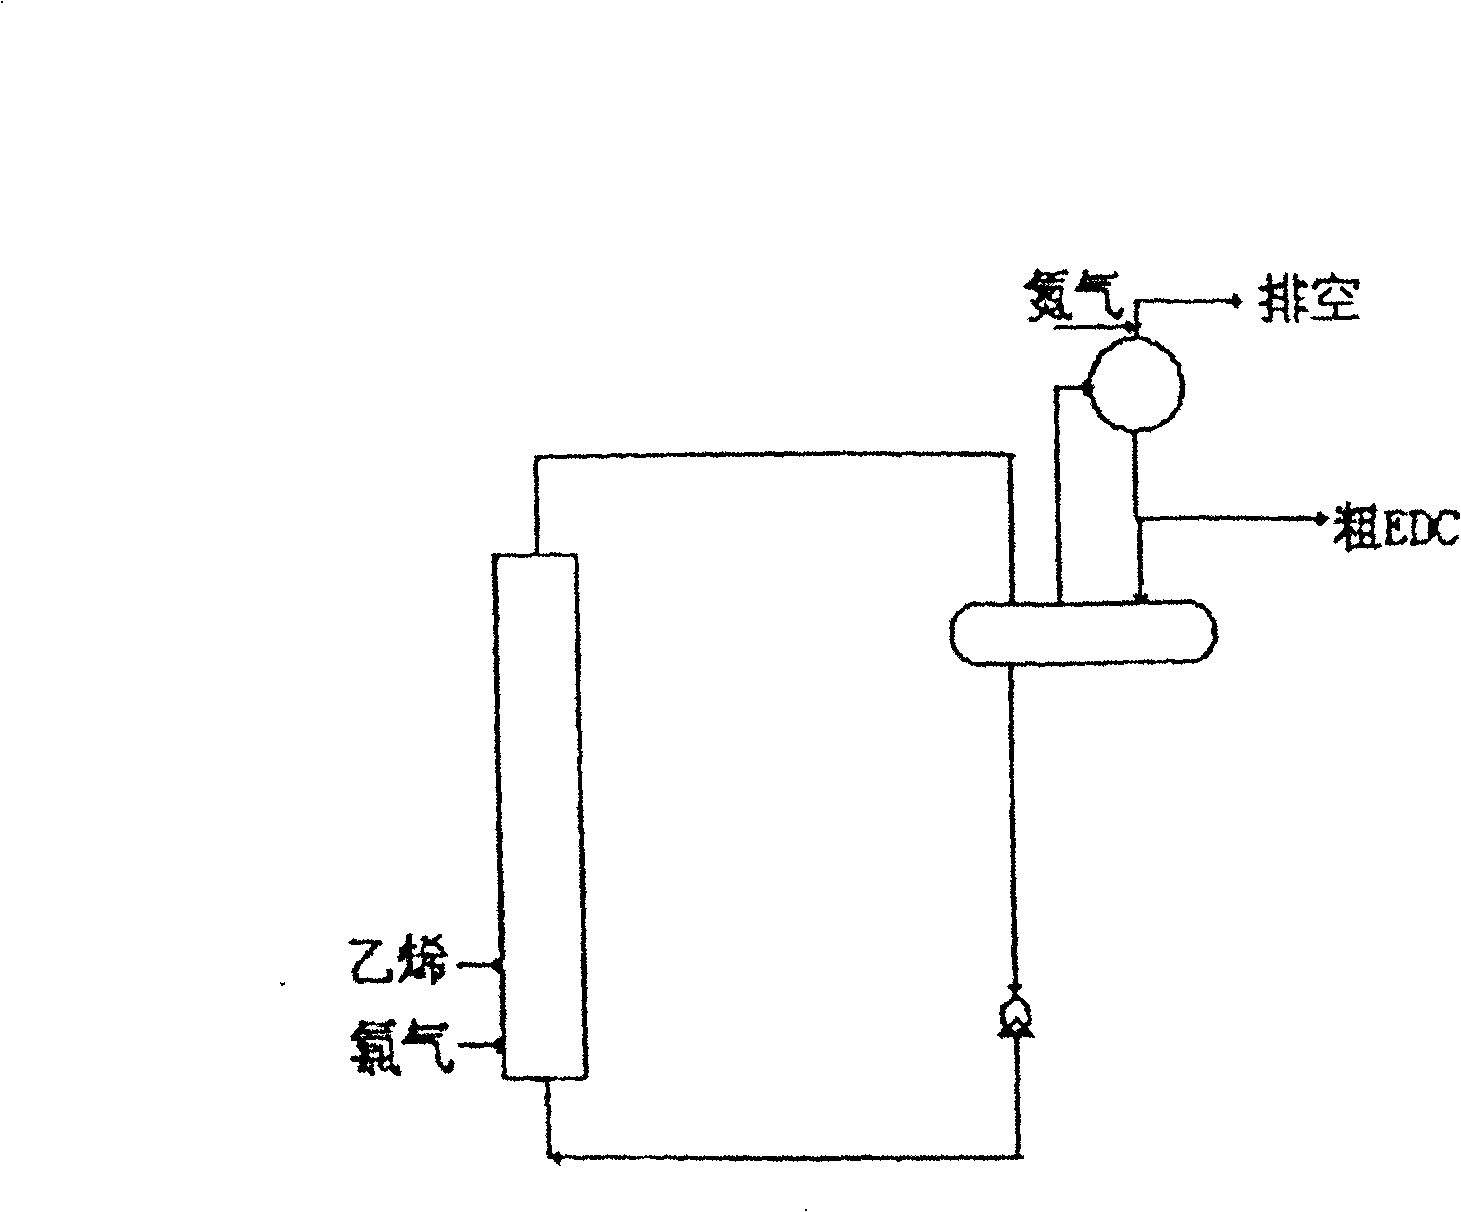 Single-tube multiple rotary static and mixed-piping reacotr with vinyl chlorination and method thereof